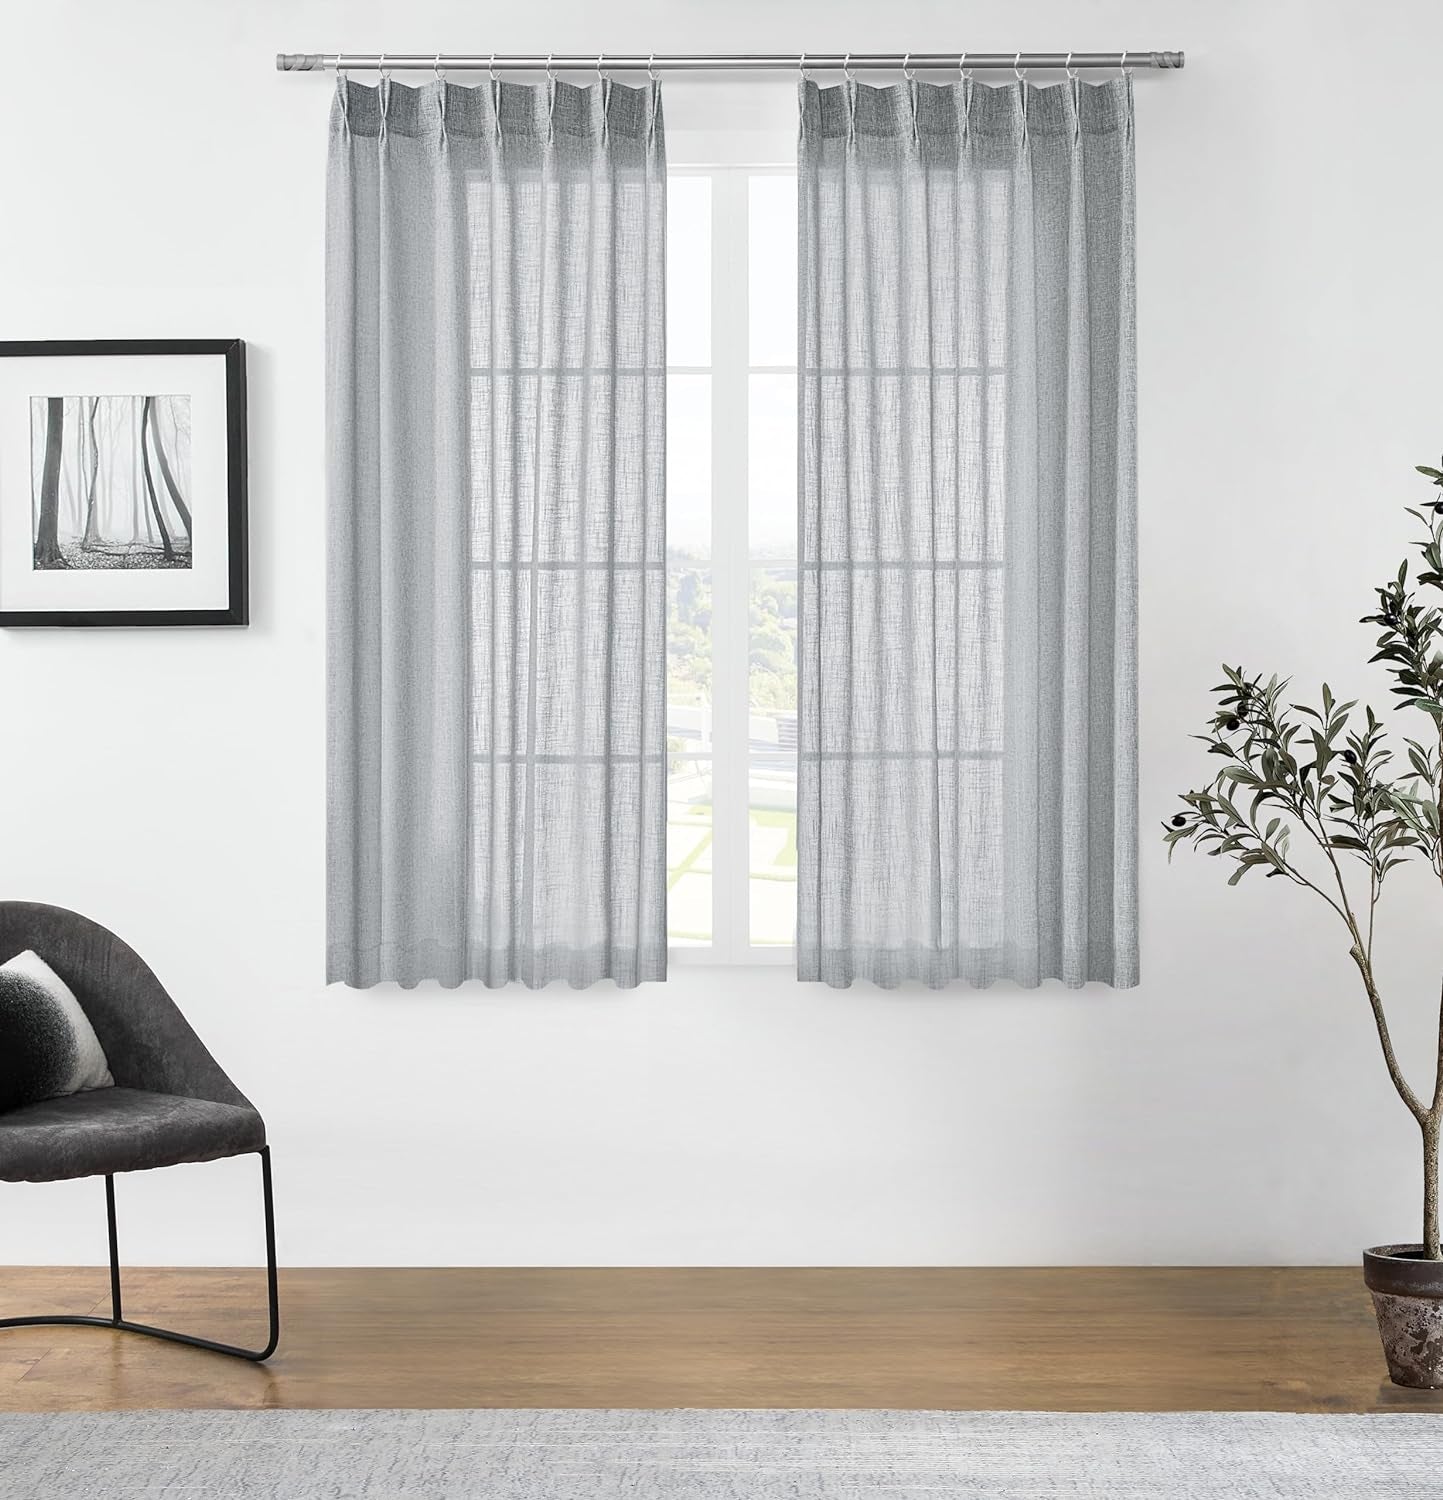 Central Park White Pinch Pleat Sheer Curtain 108 Inches Extra Long Textured Farmhouse Window Treatment Drapery Sets for Living Room Bedroom, 40"X108"X2  Central Park Gray White/Pinch 40"X63"X2 